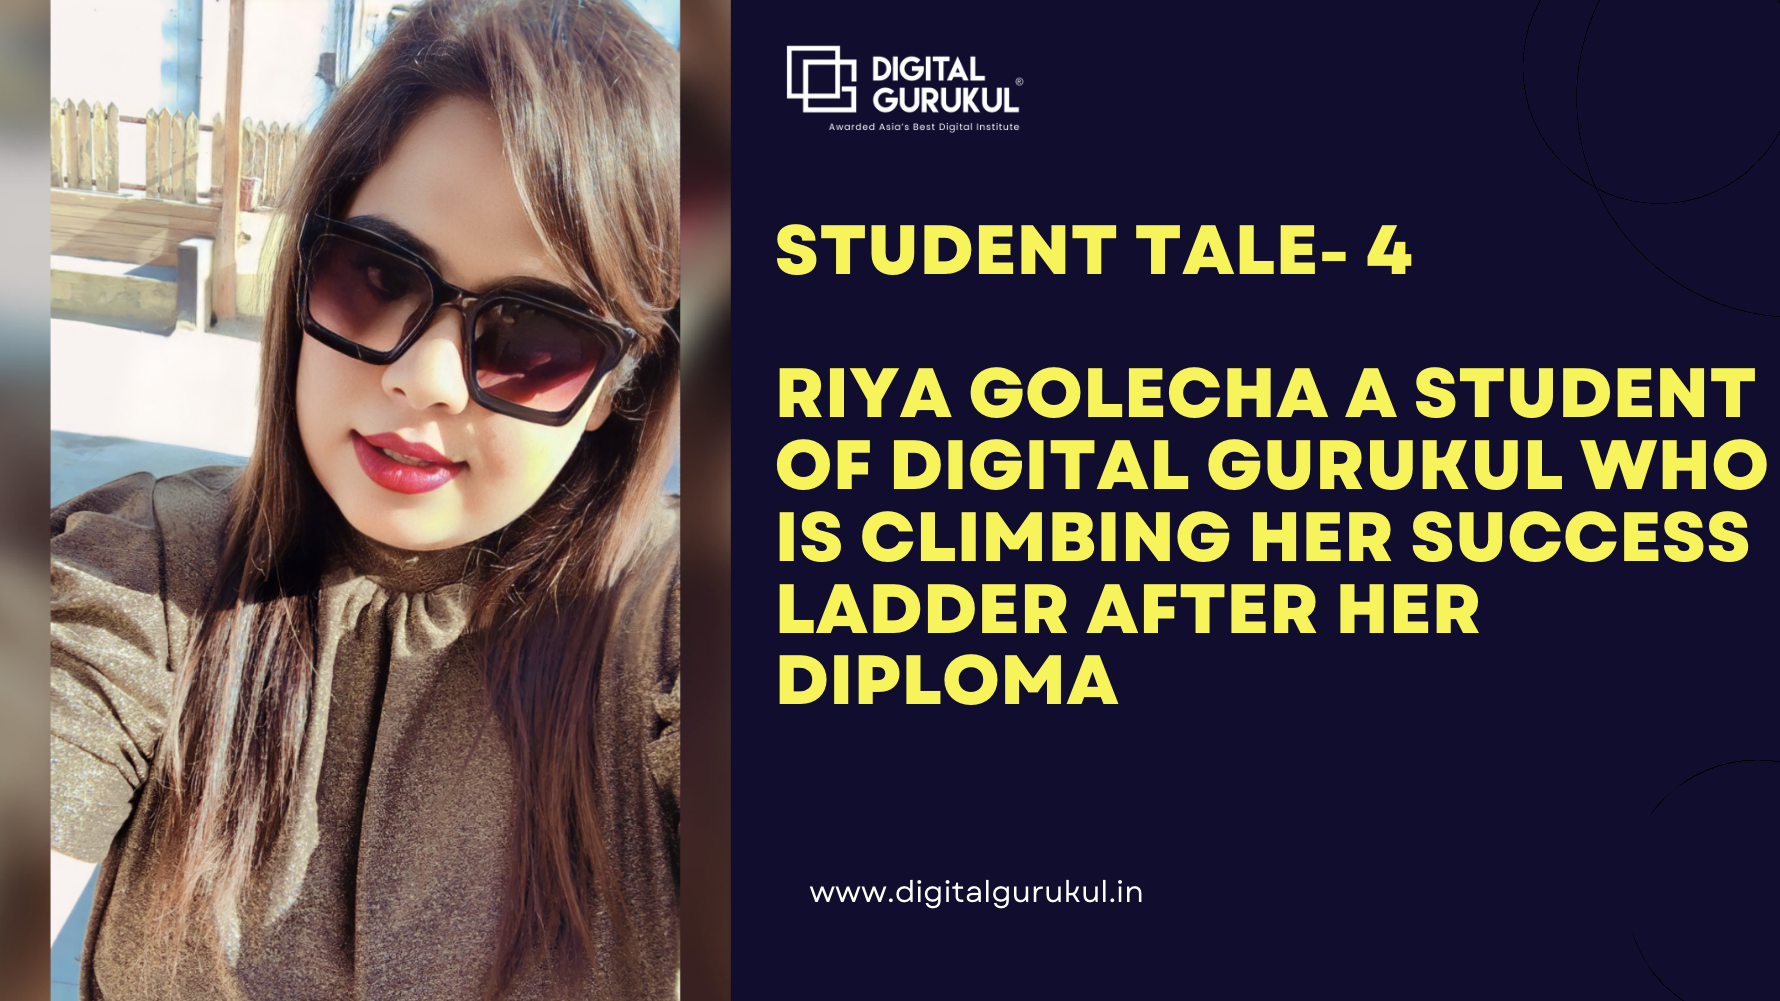 Student Tale- 4 Riya Golecha, A student of Digital Gurukul who is climbing her success ladder after her diploma